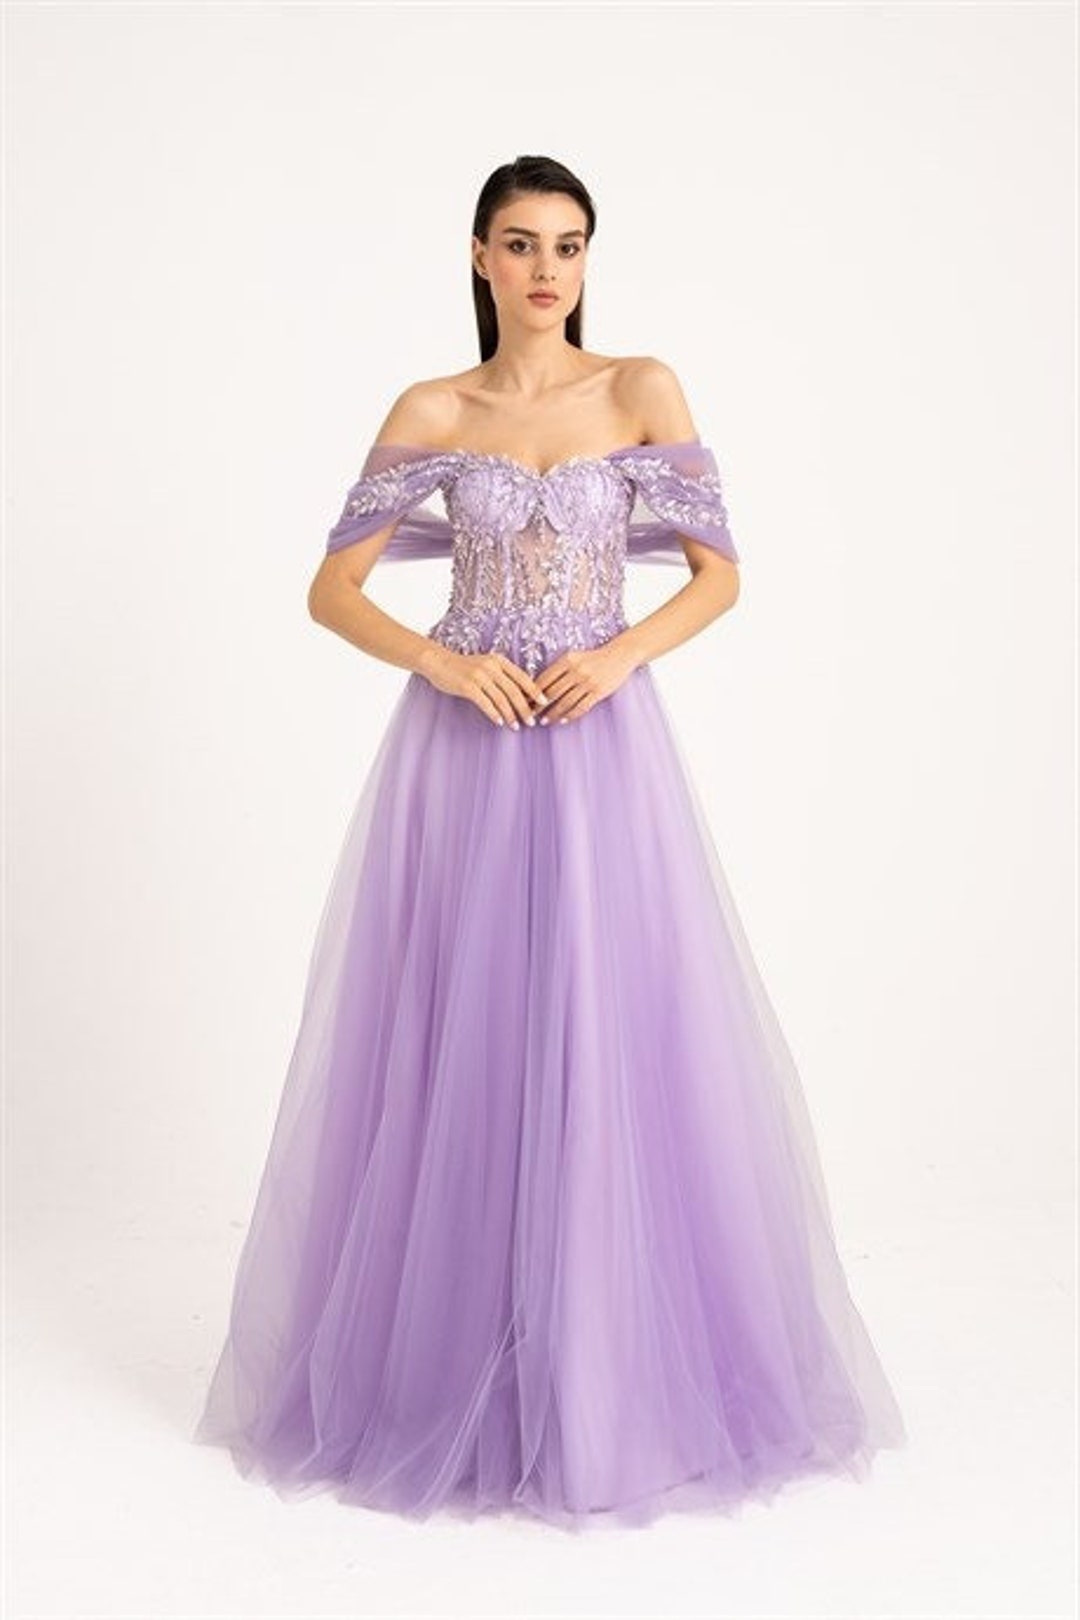 Cute Tiered Lavender Tulle Sweetheart Corset Prom Dress - VQ